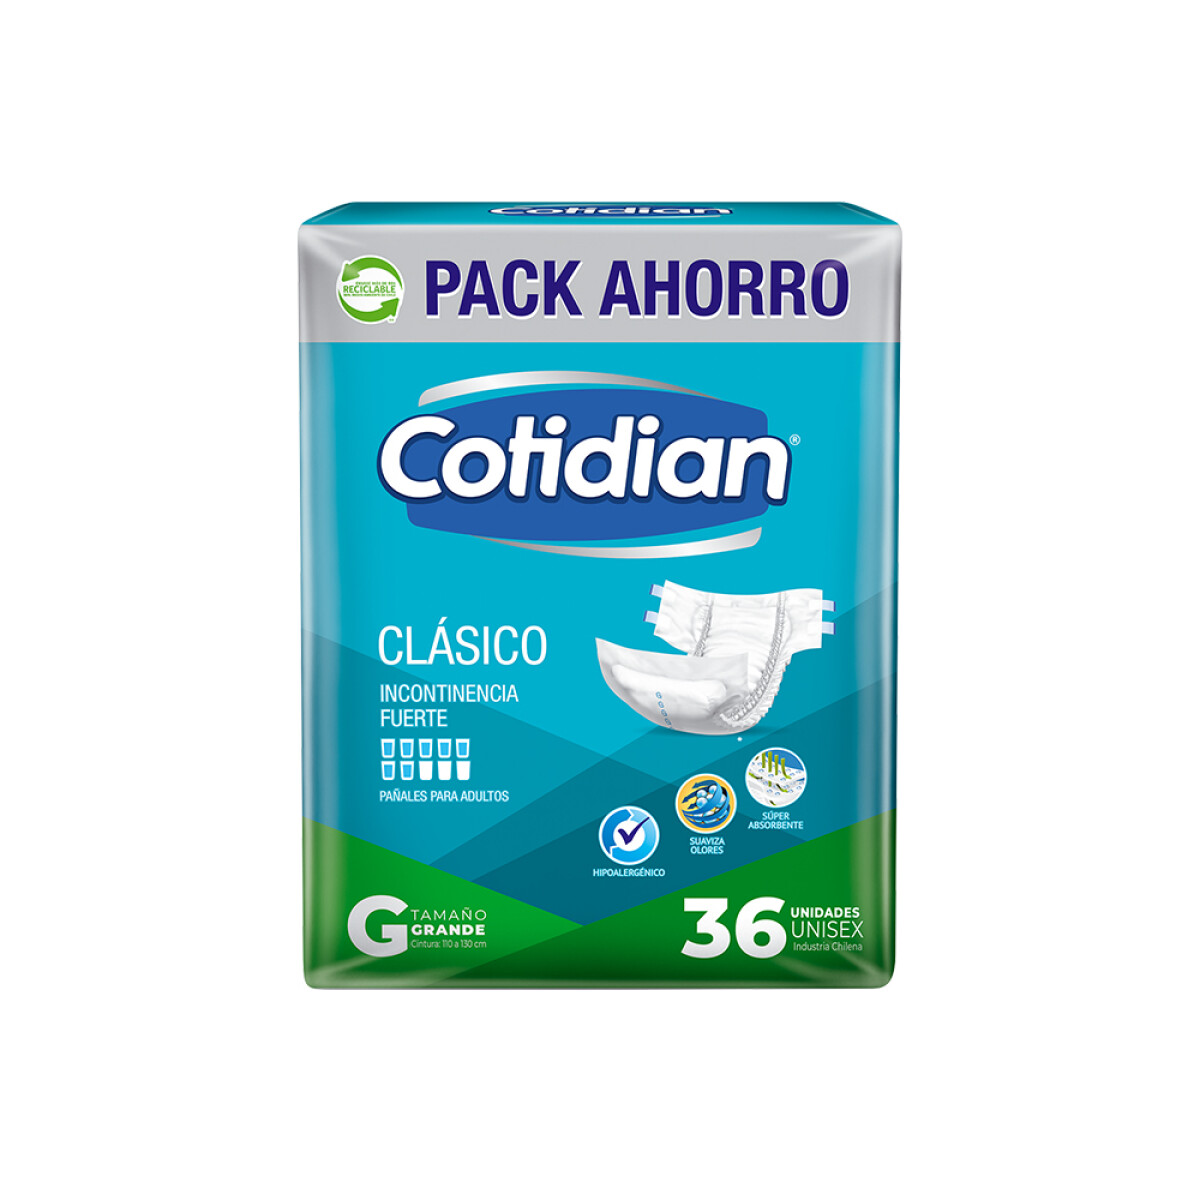 Pañales Cotidian Clásico Talle G 36 Uds. 